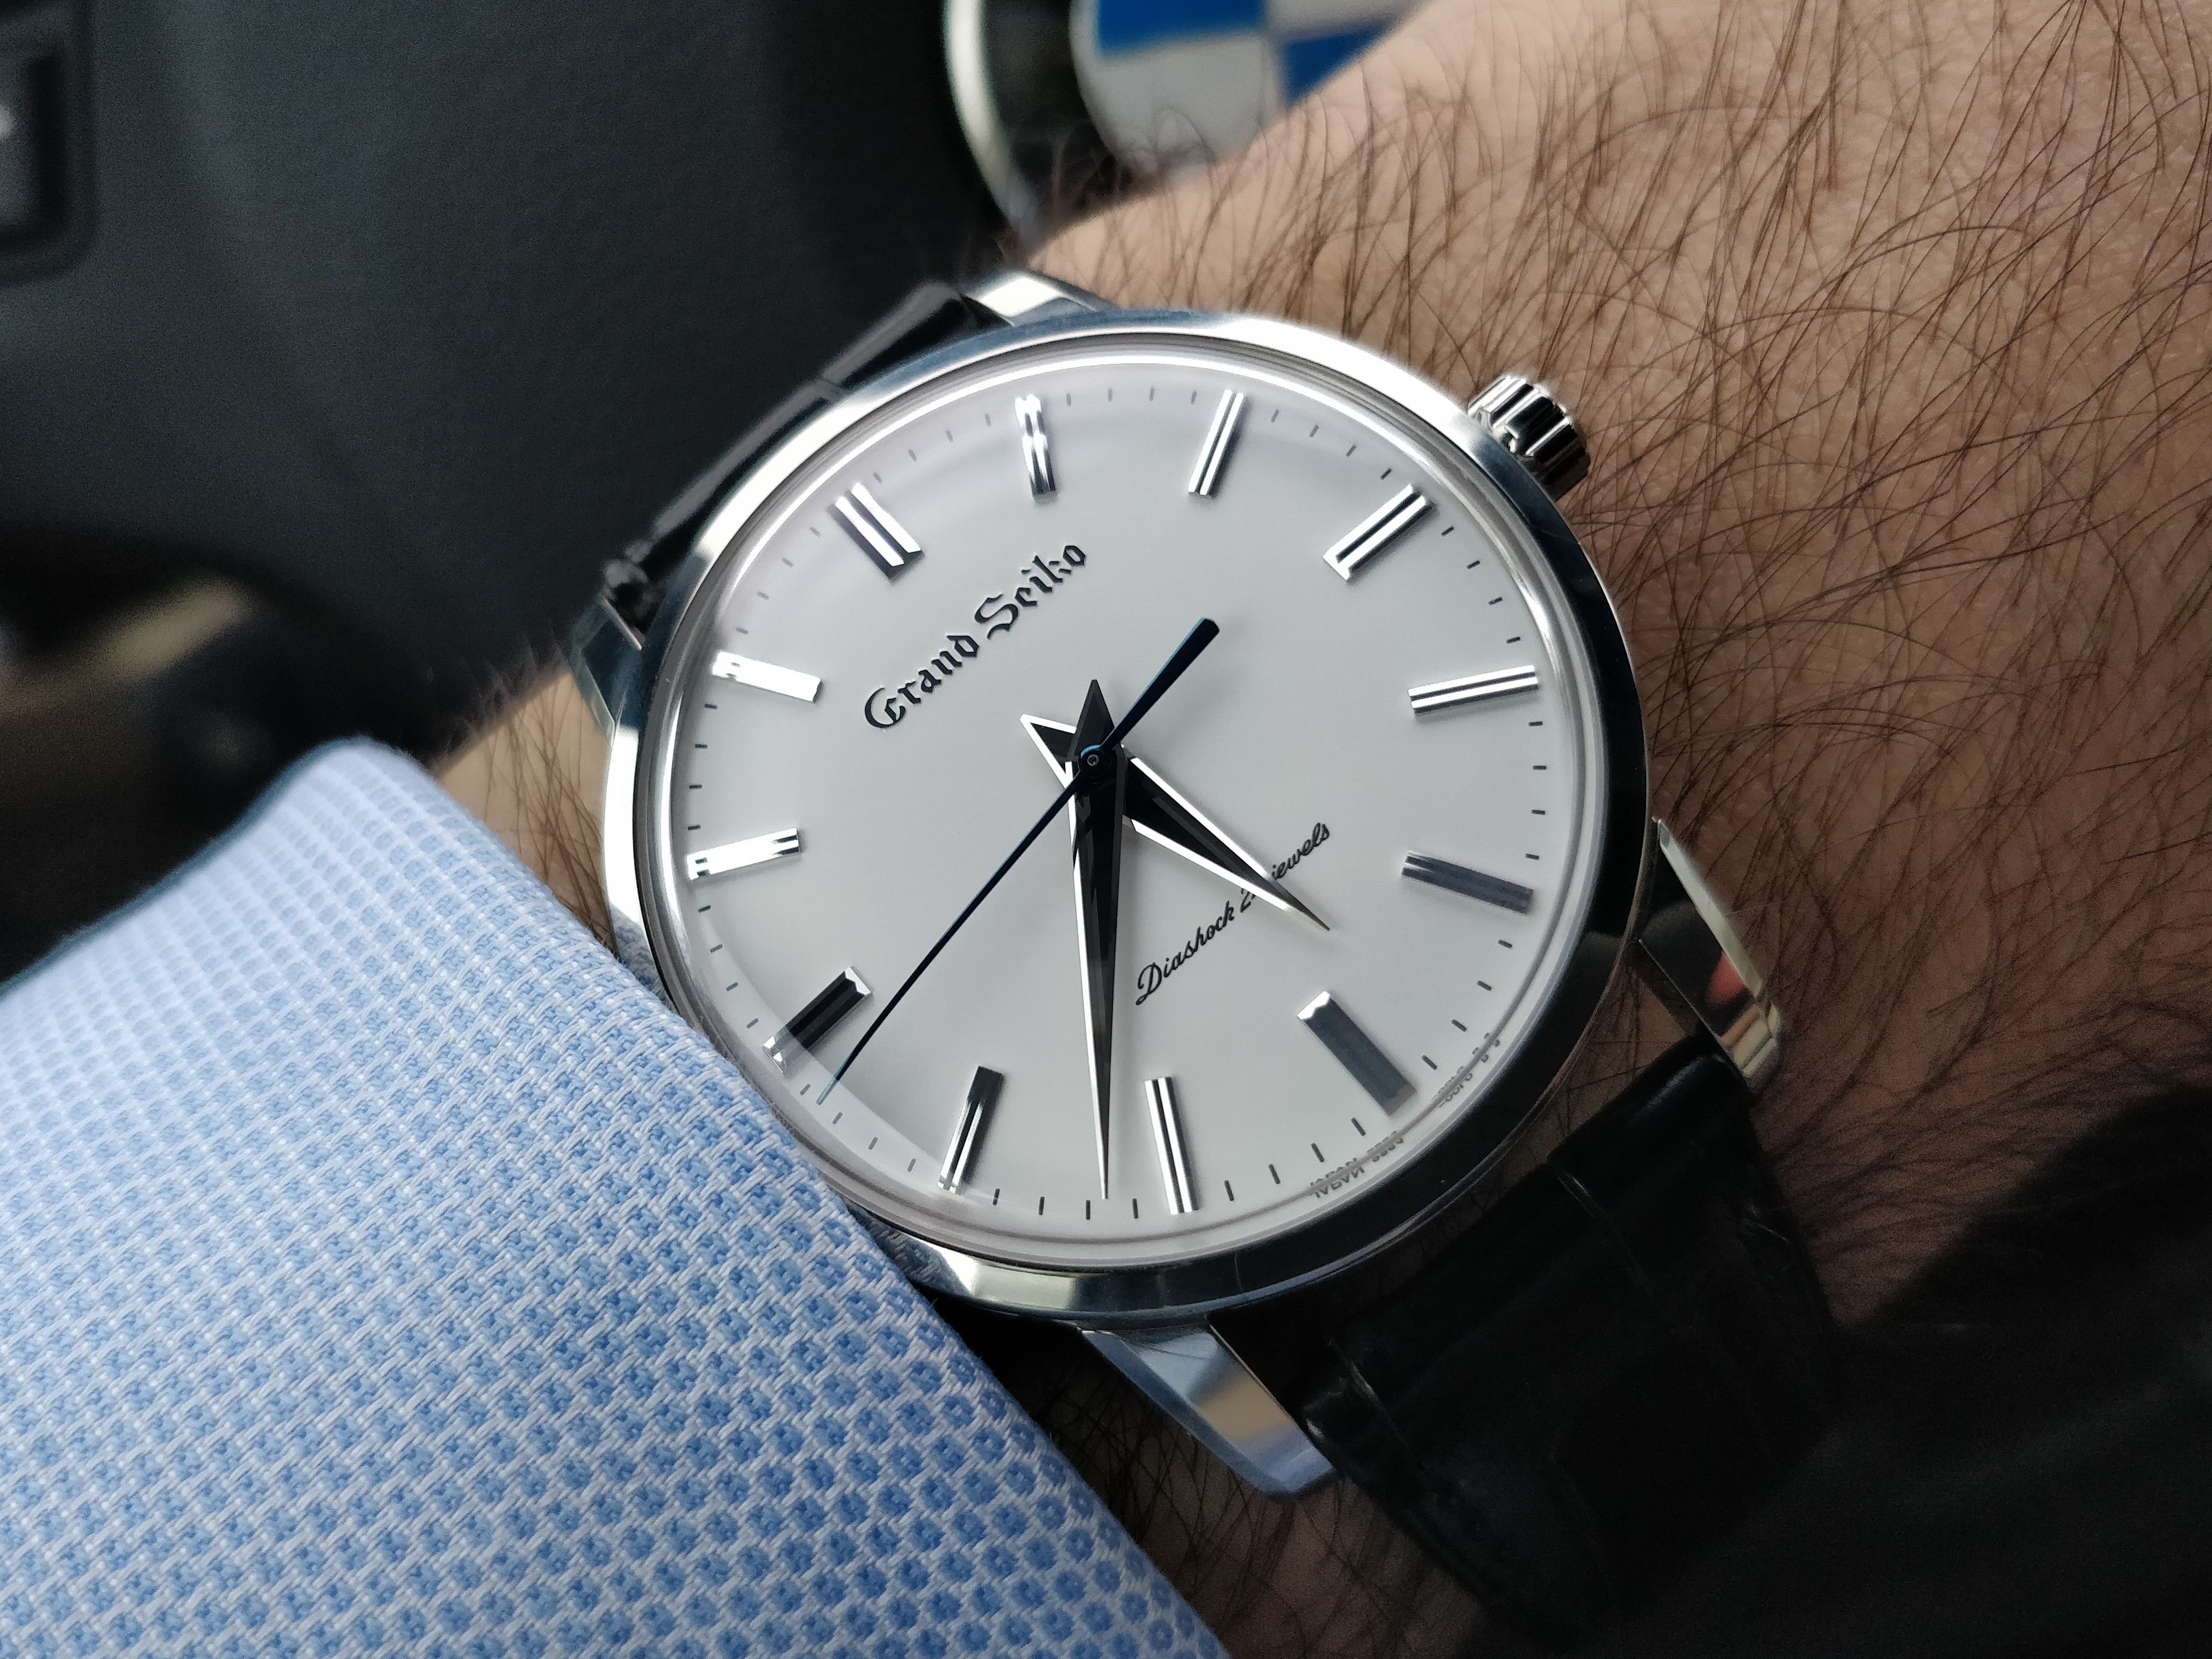 Is Grand Seiko getting better? | Omega Forums